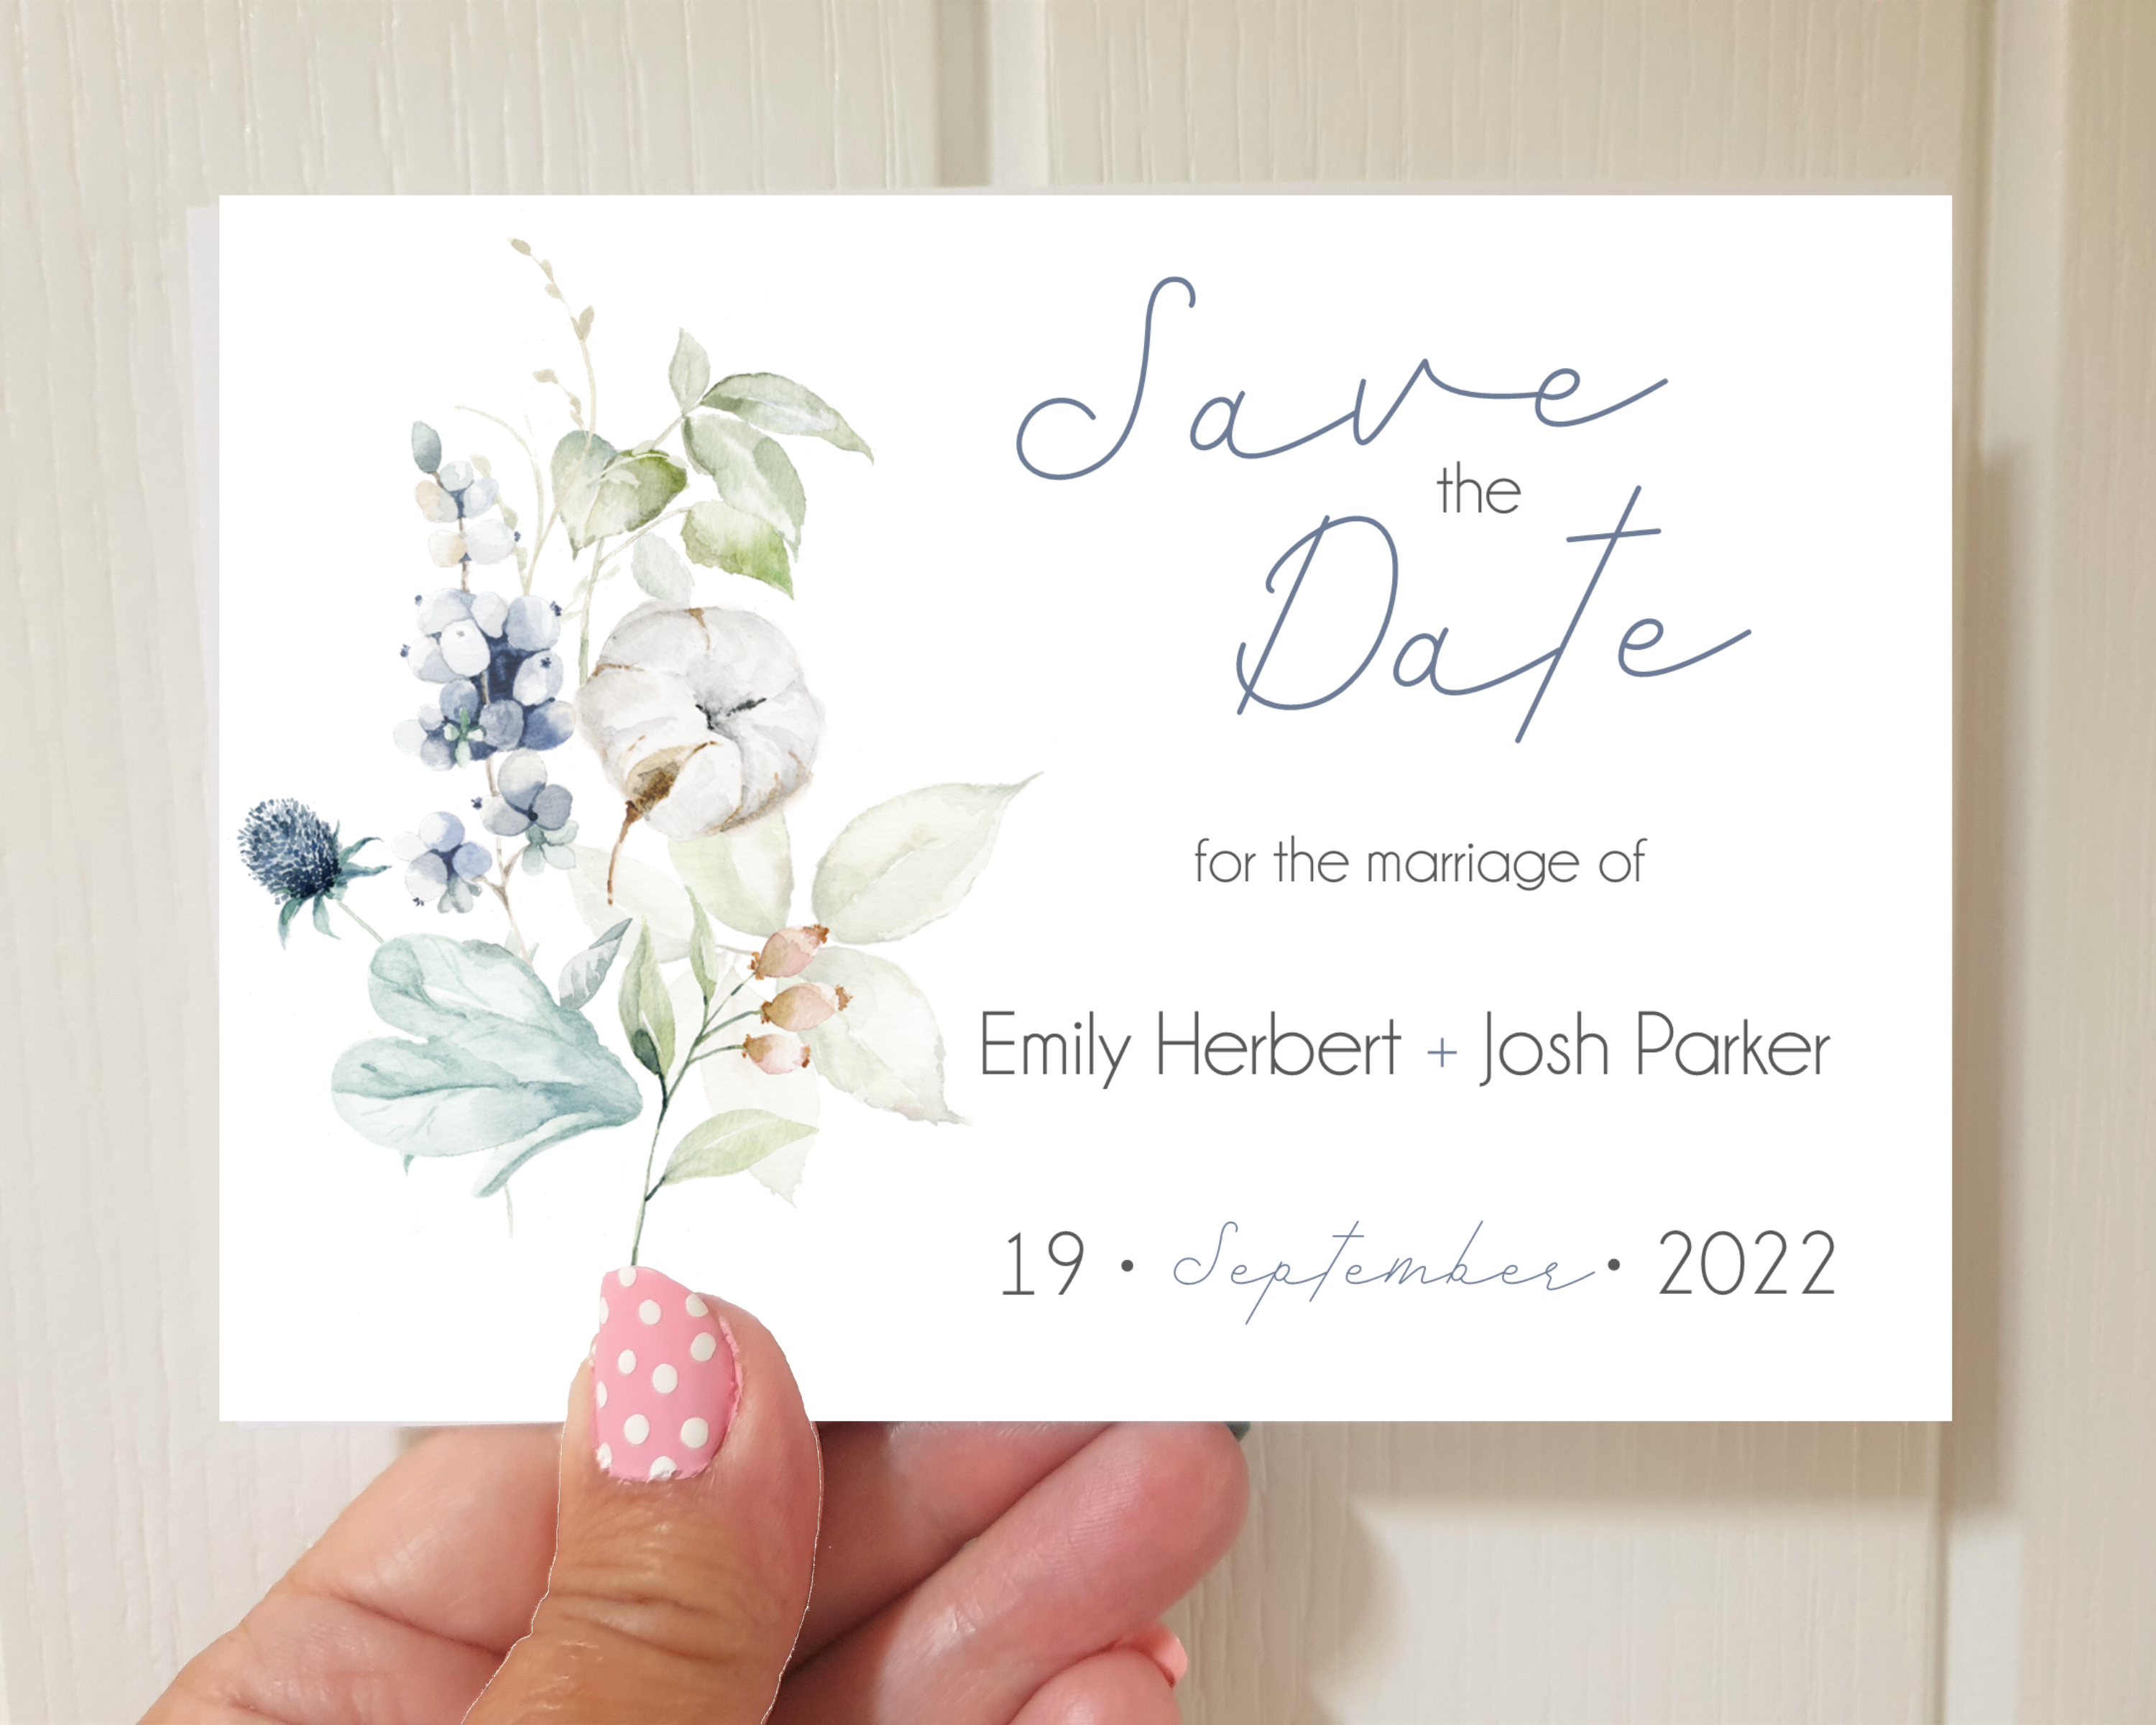 Dusty blue & cotton flowers Poppleberry A6 wedding save the date card, held to compare size to thumb.